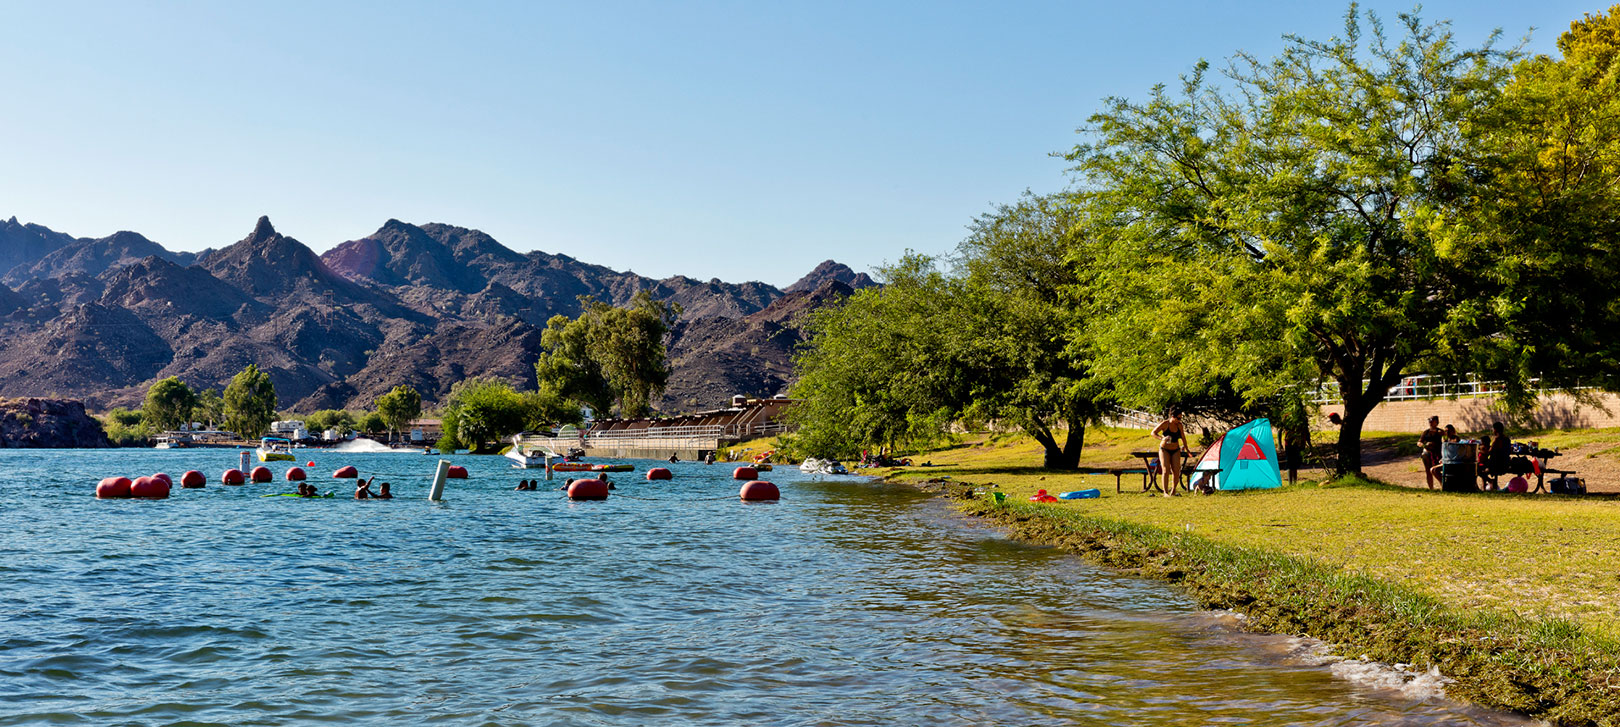 People enjoy swimming by the grassy banks of the Colorado River